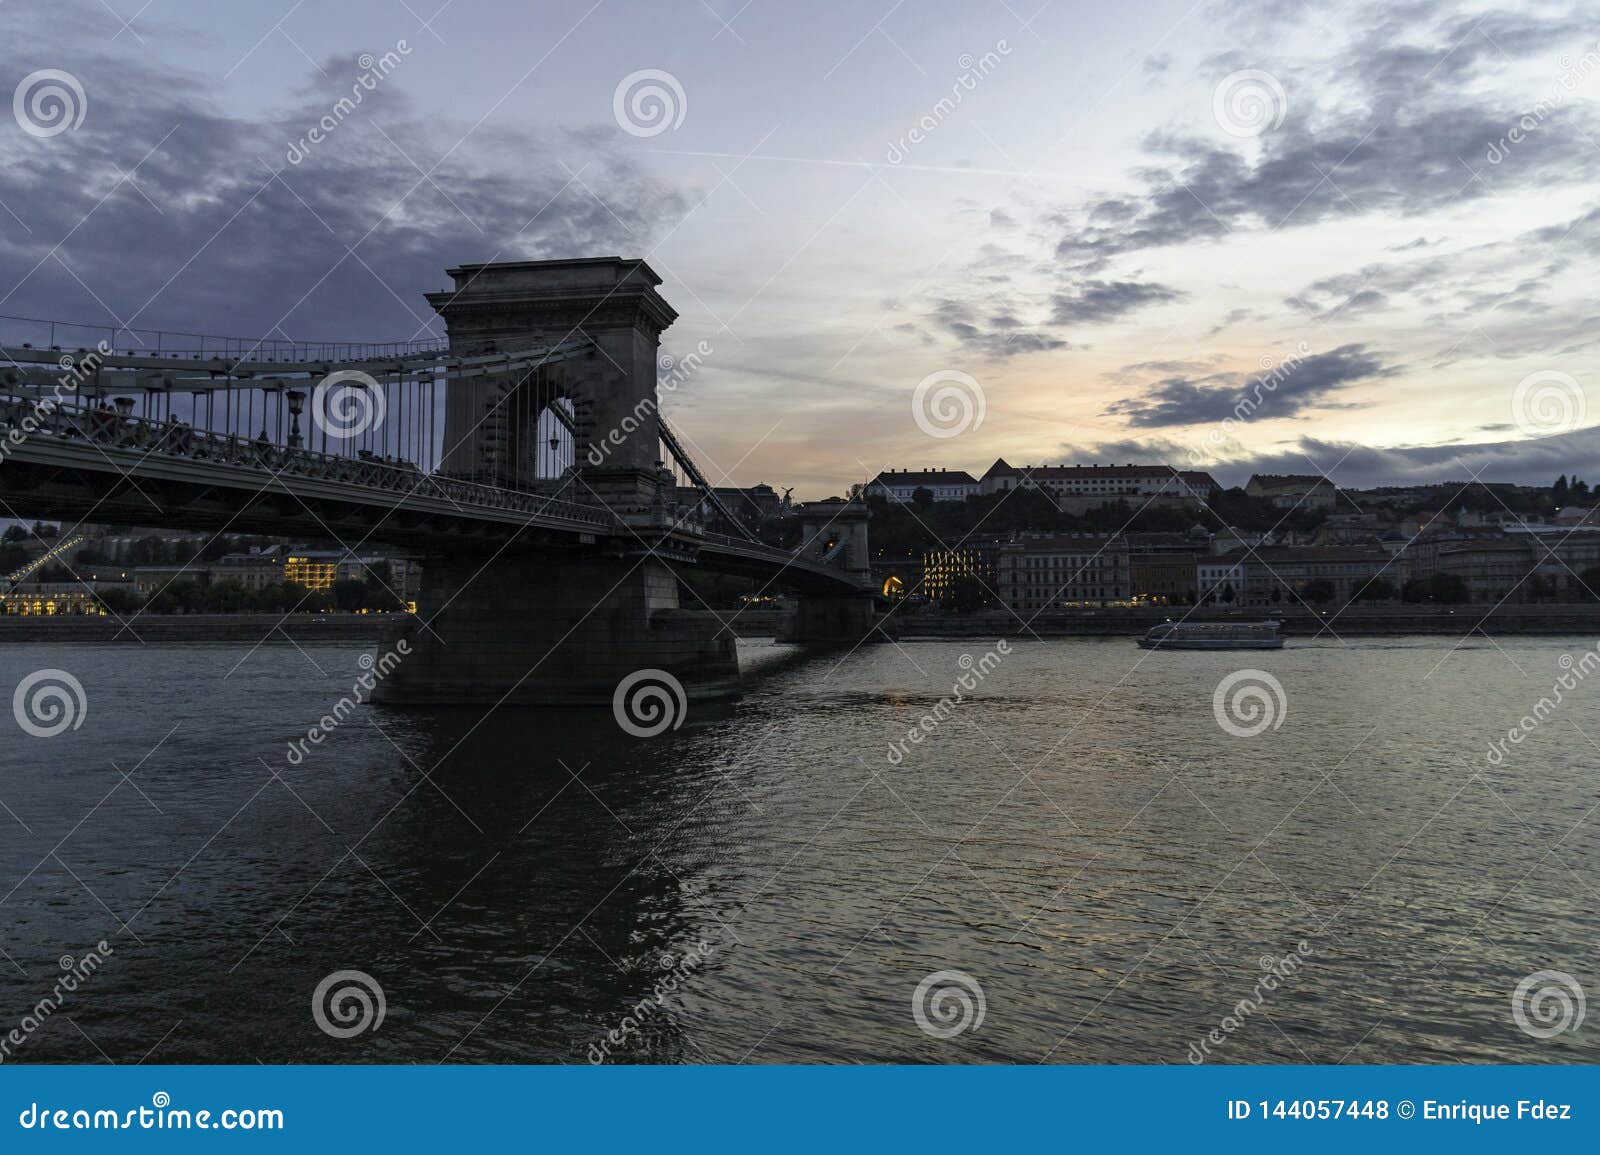 view of the chain bridge at dusk from the pest riverbank, budapest, hungary